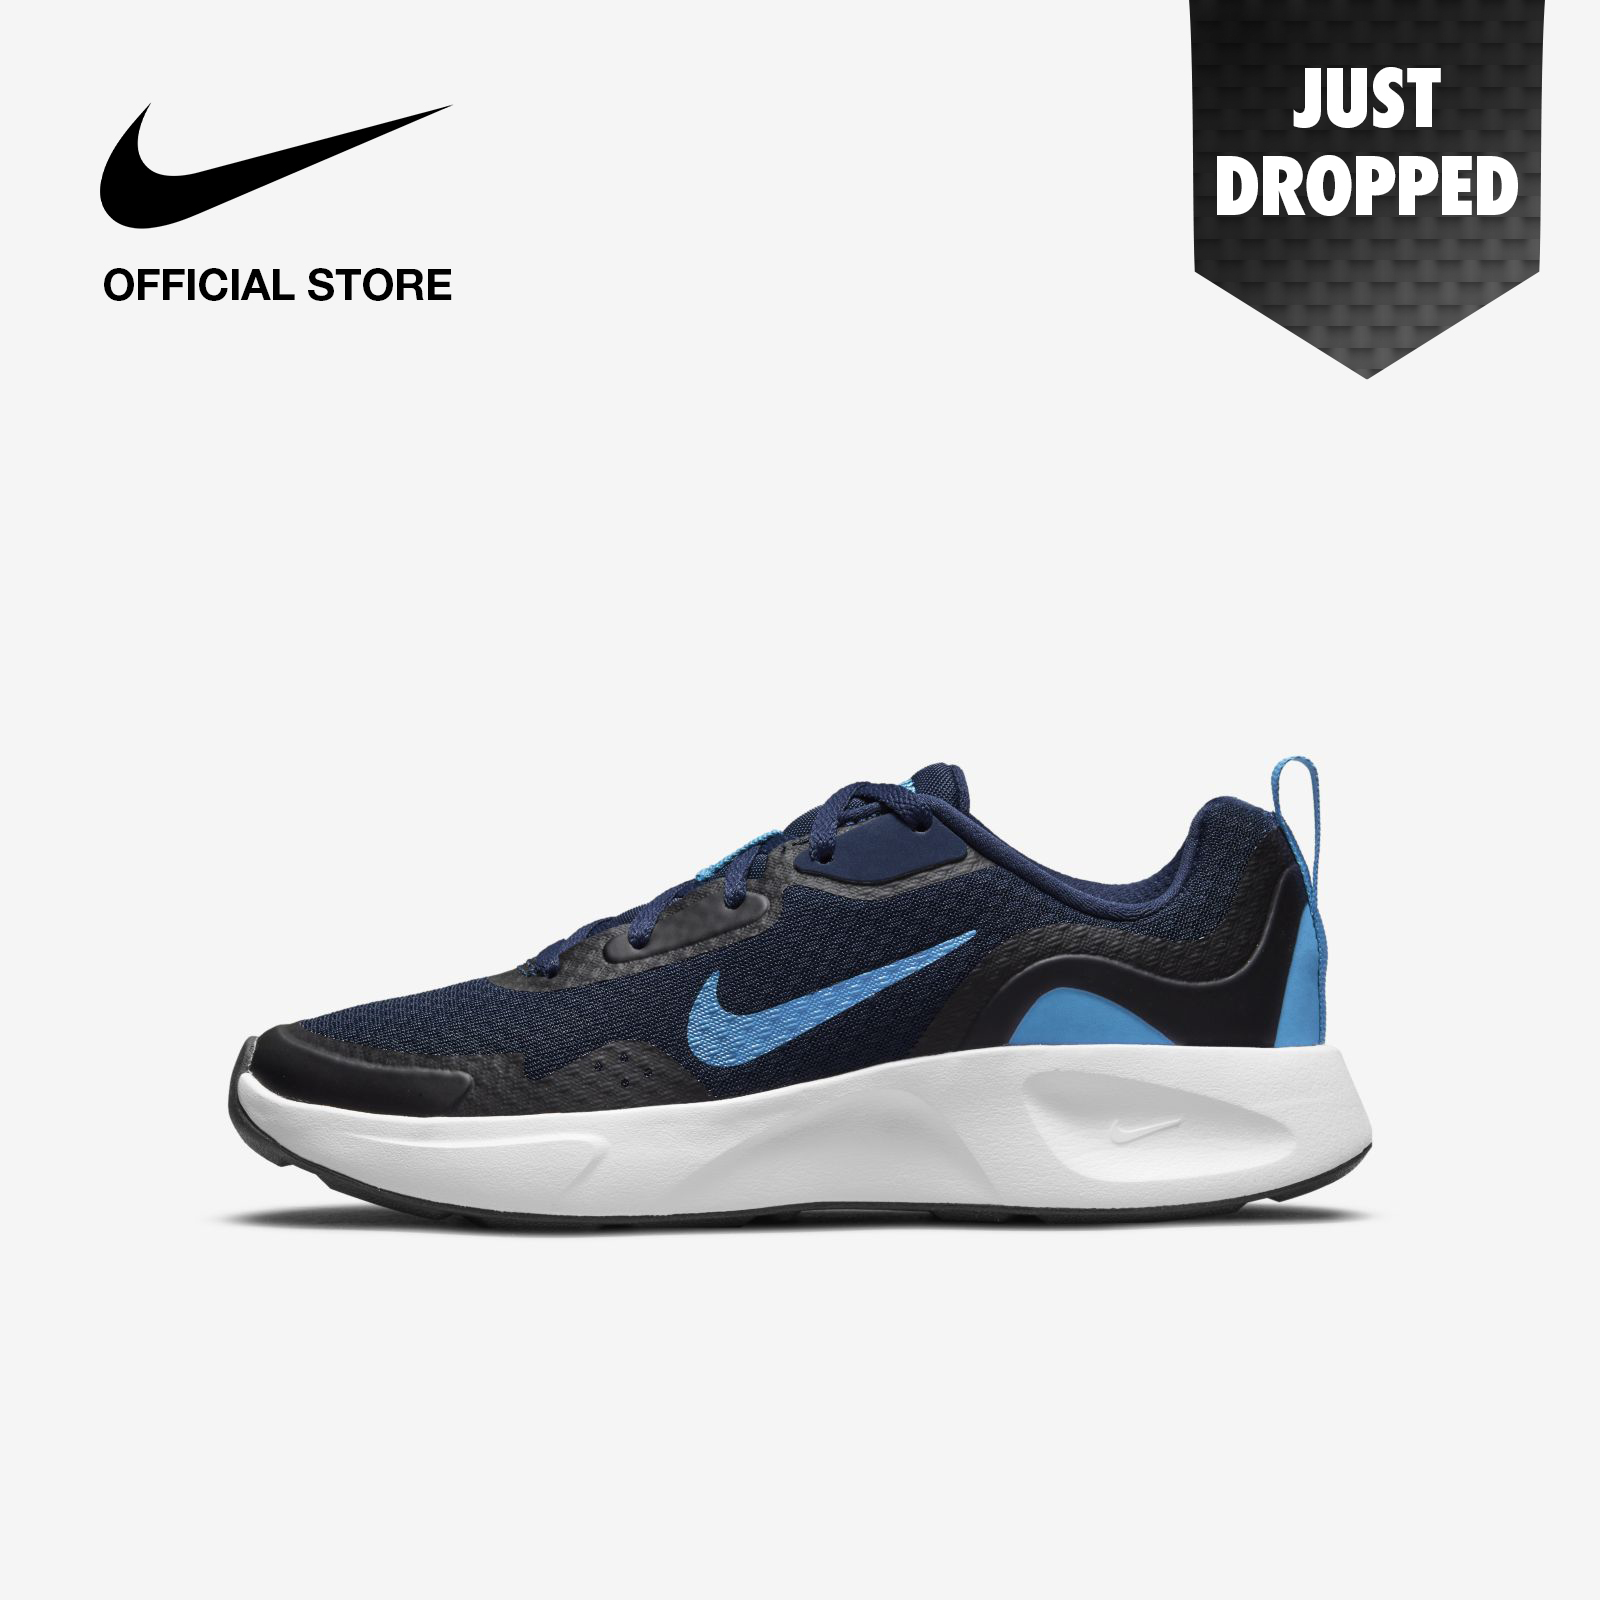 Nike Kids' Wearallday Shoes - Midnight Navy